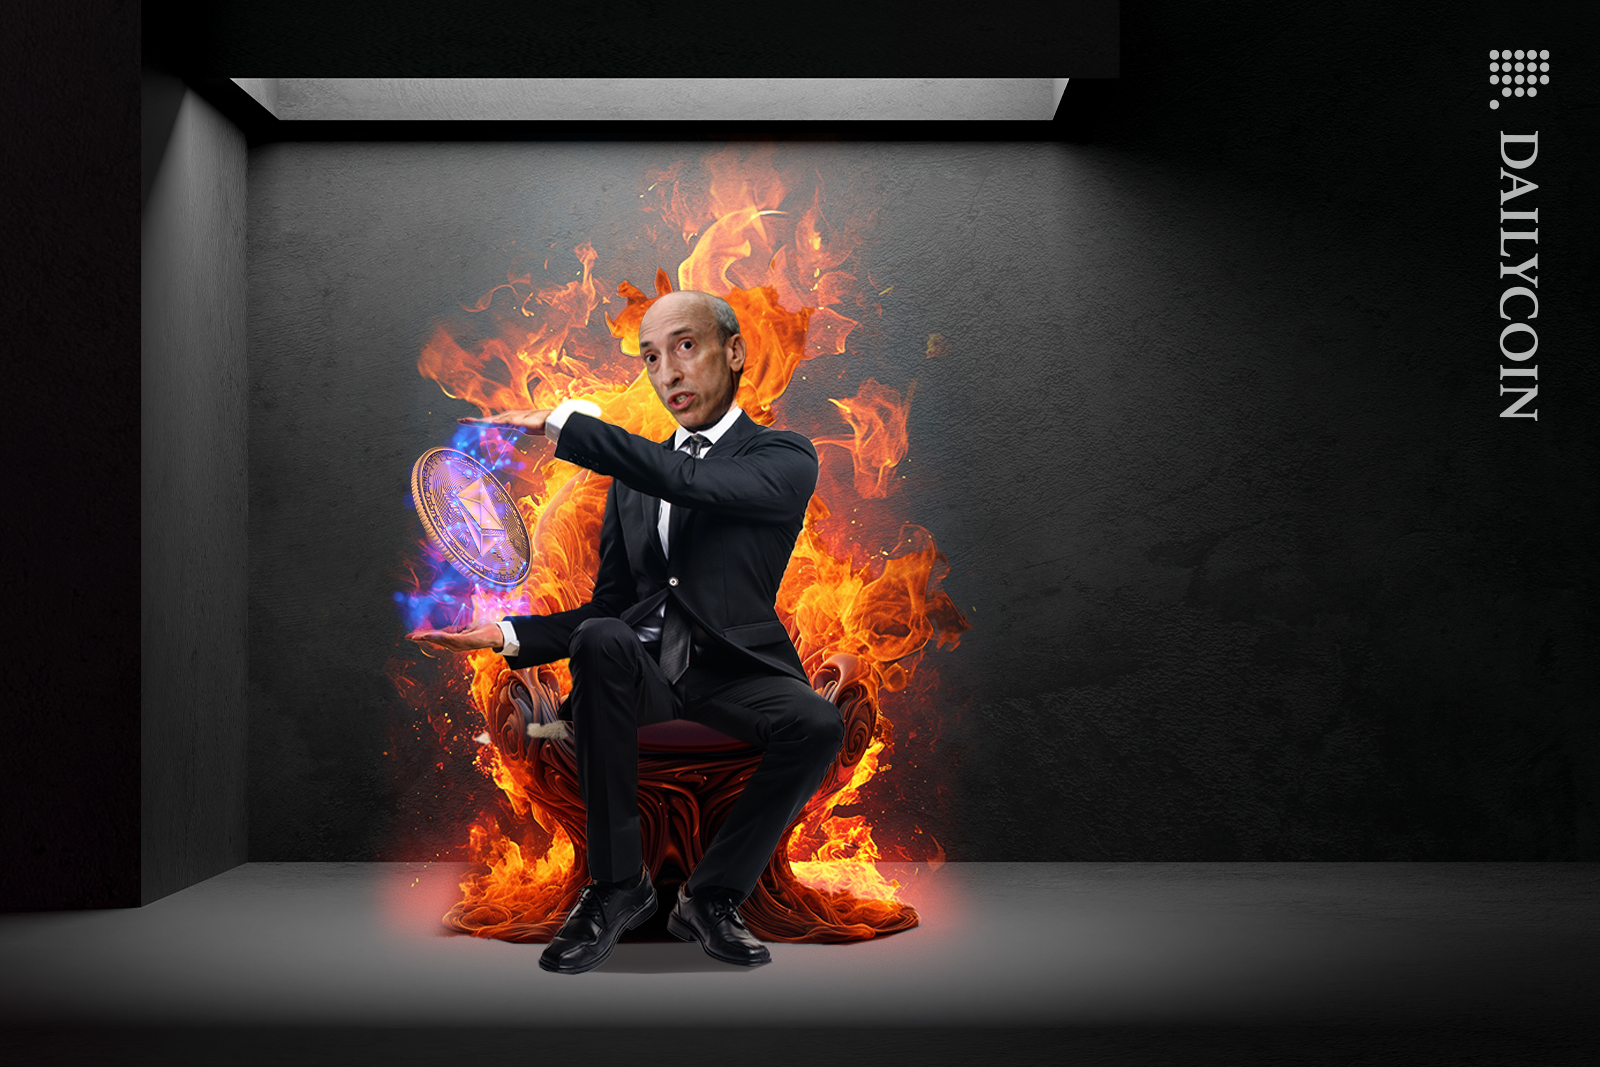 Gary Gensler wants to put Ethereum in the hot seat of fire.